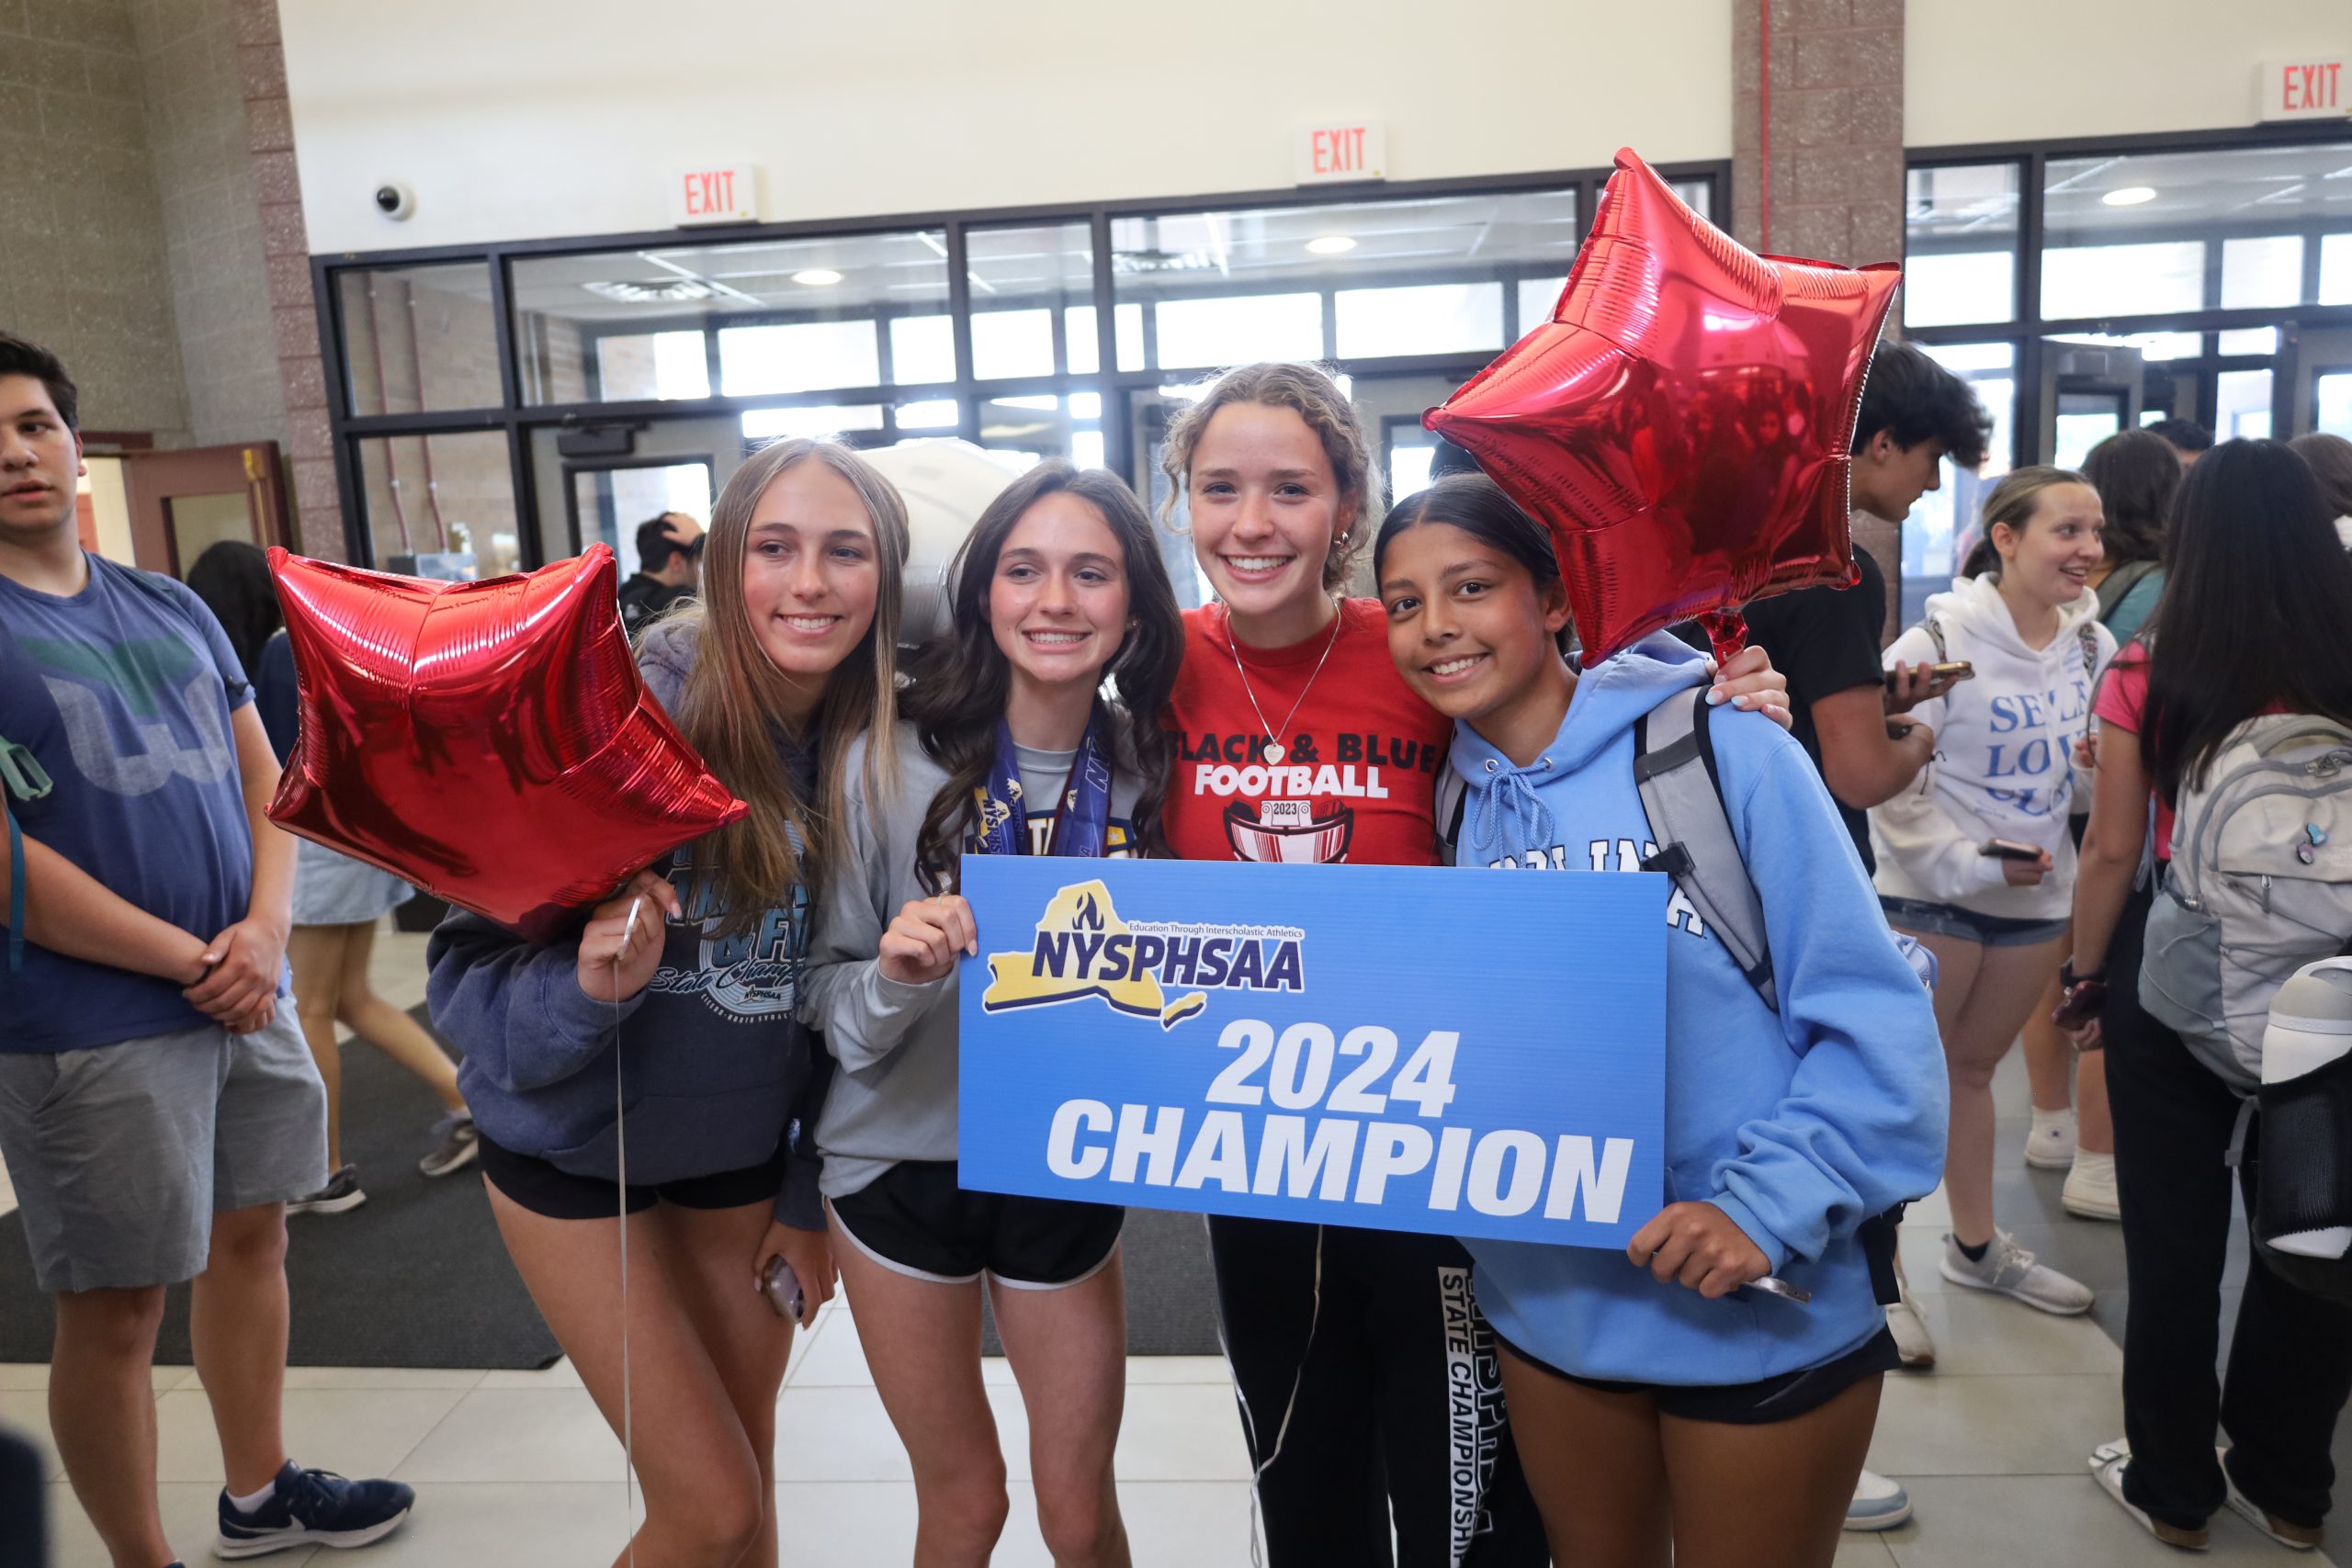 Four track and field athletes poses together. They are holding a sign that reads NYSPHSAA 2024 Champion